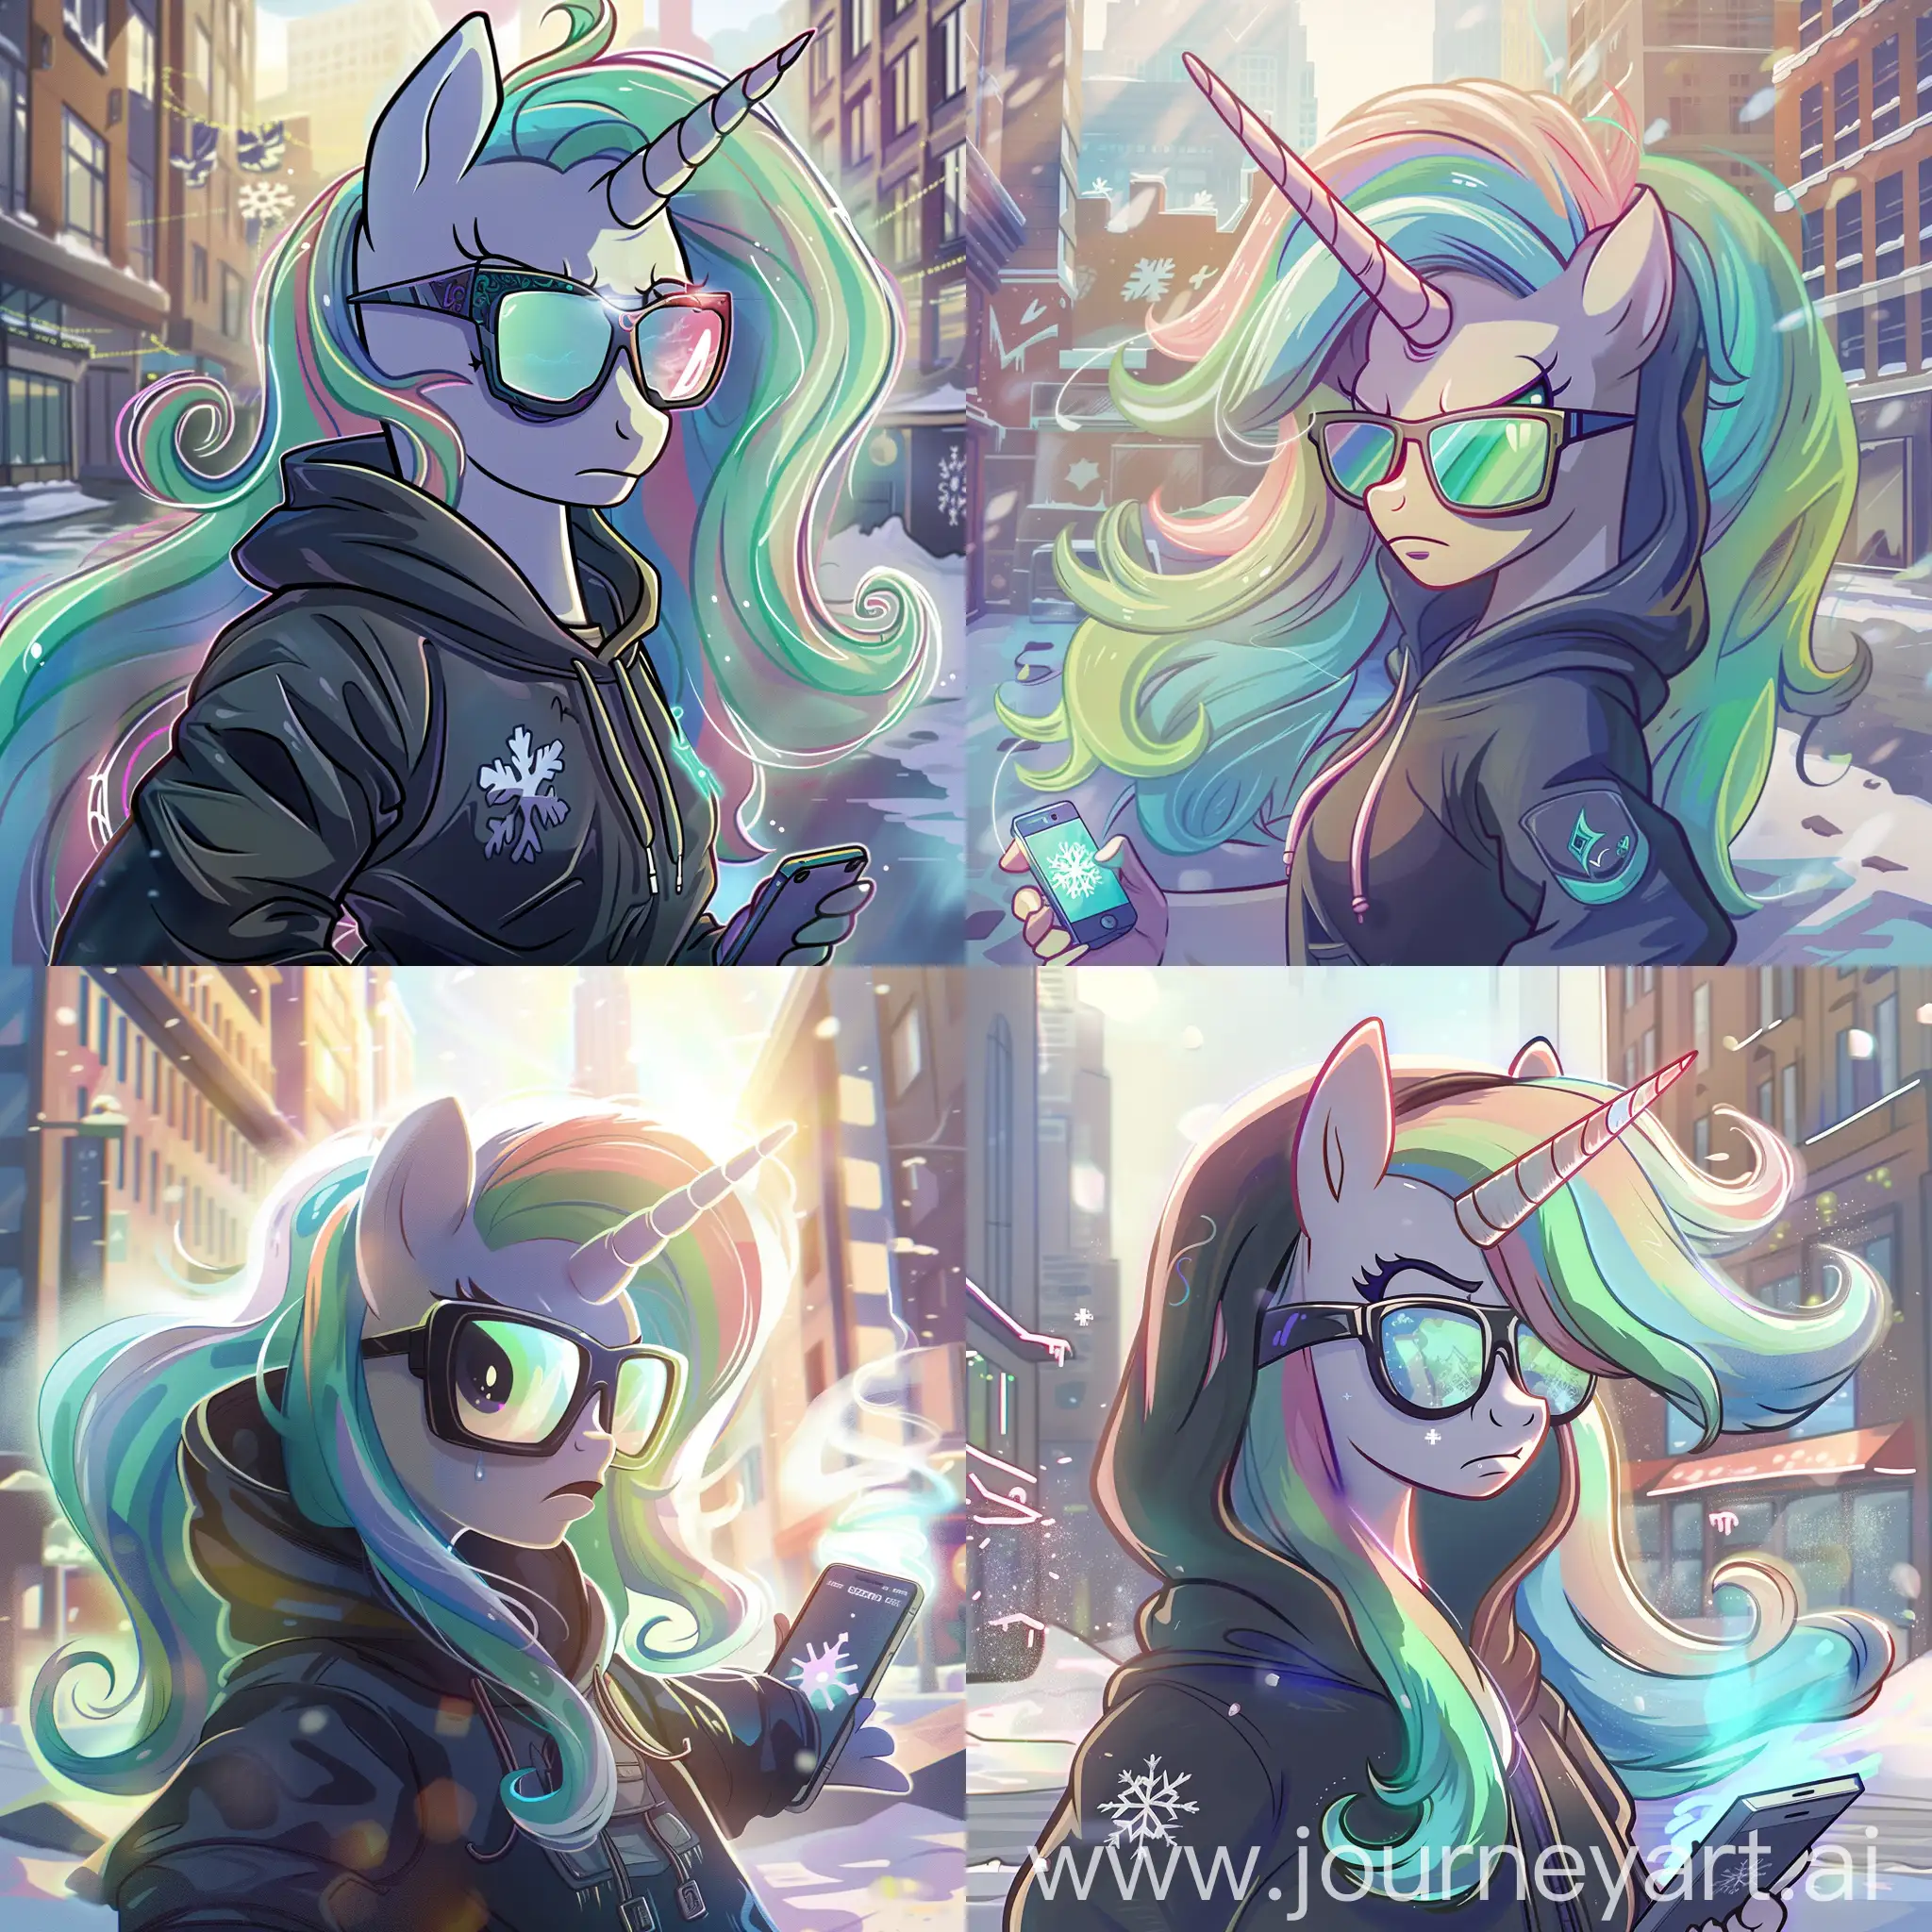 score_9, score_8_up, score_7_up, score_6_up, A serious female alicorn unicorn, Princess Celestia from My Little Pony, is depicted wearing a dark hoodie and sunglasses with tinted lenses that glow with the sunlight. Celestia's mane flows in a wavy pattern of pastel colors, with shades of blue, green, and pink blending into each other. She is looking at something out of the frame with a displeased expression. The setting is an urban environment with multi-story buildings, snow on the ground, and a clear winter day. In her outstretched magical aura, there is a smartphone with a snowflake logo on its back.